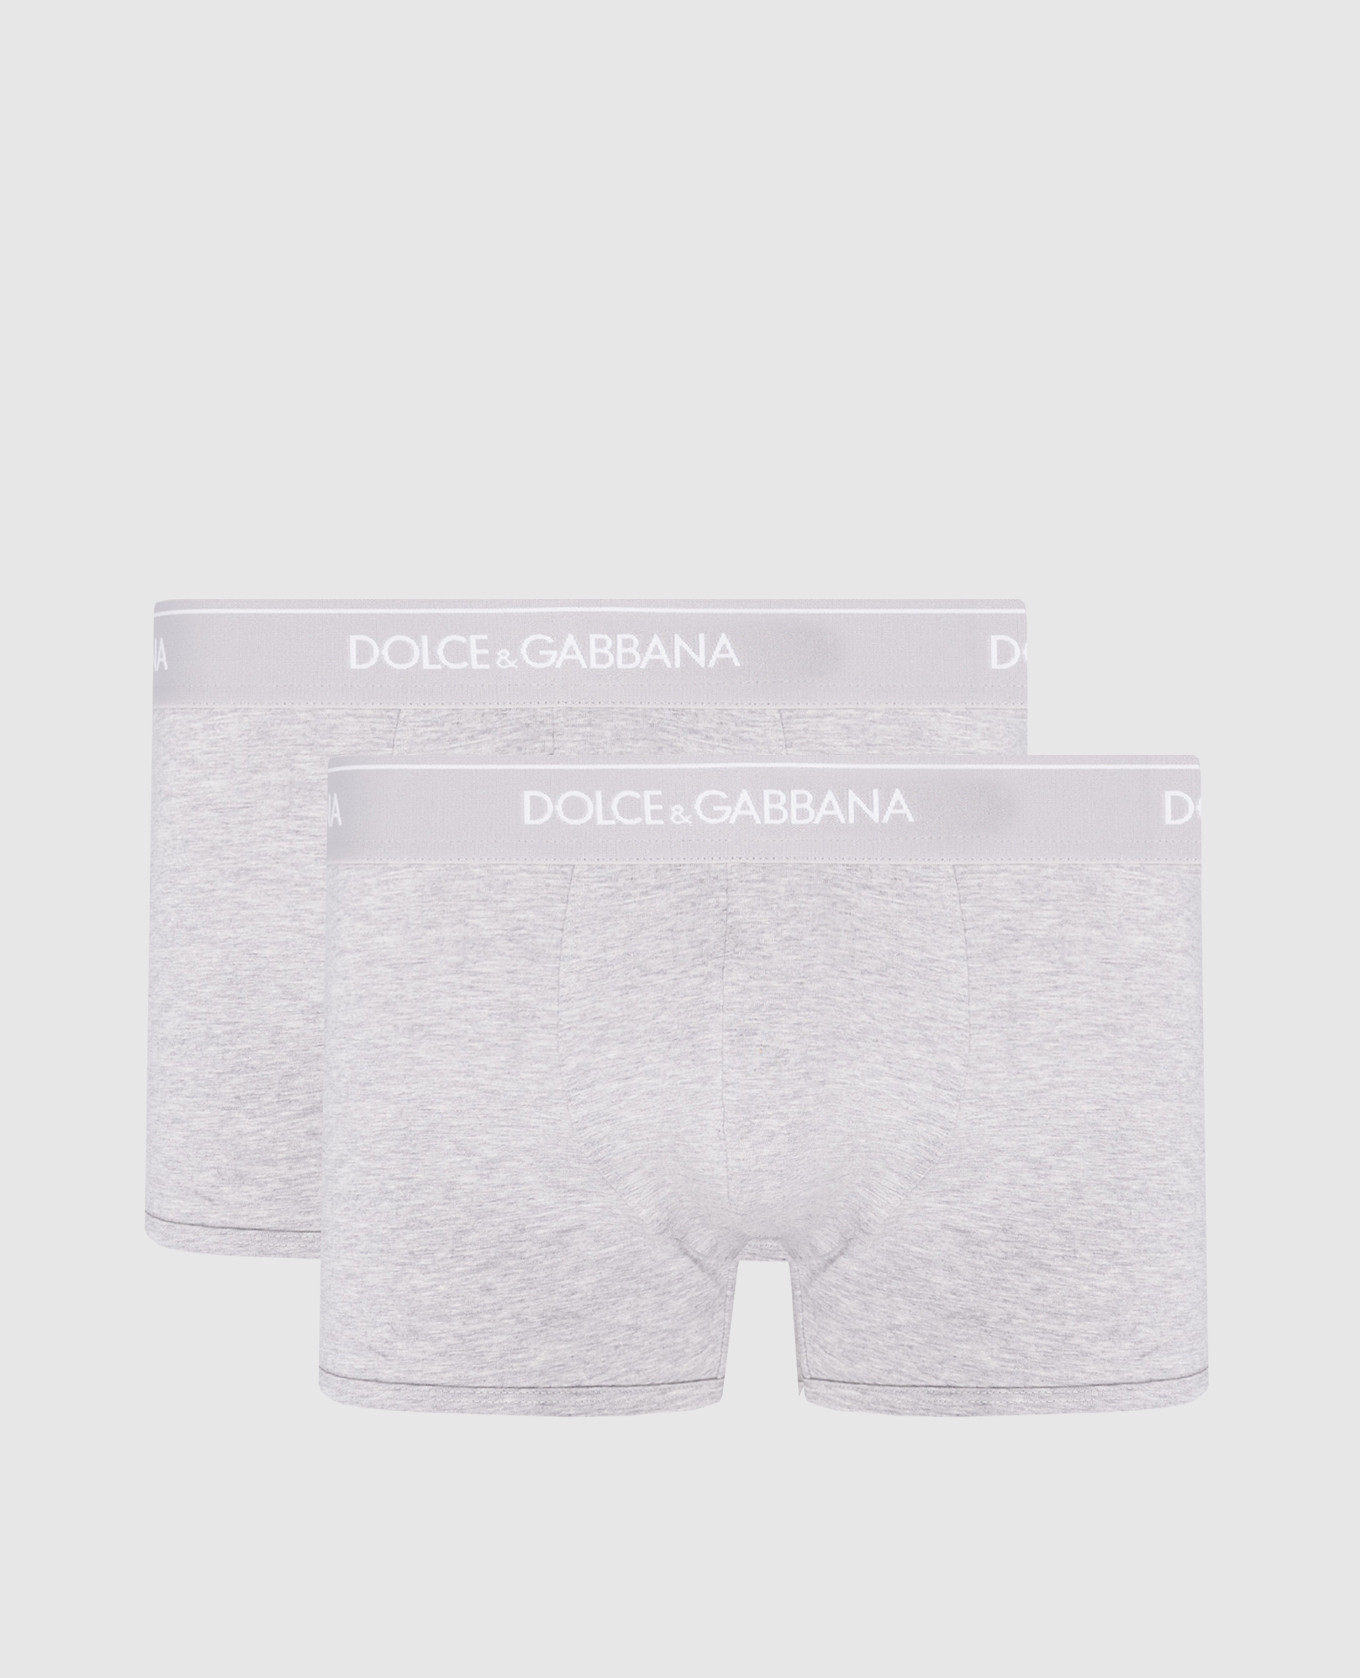 A set of gray boxer briefs with a logo pattern